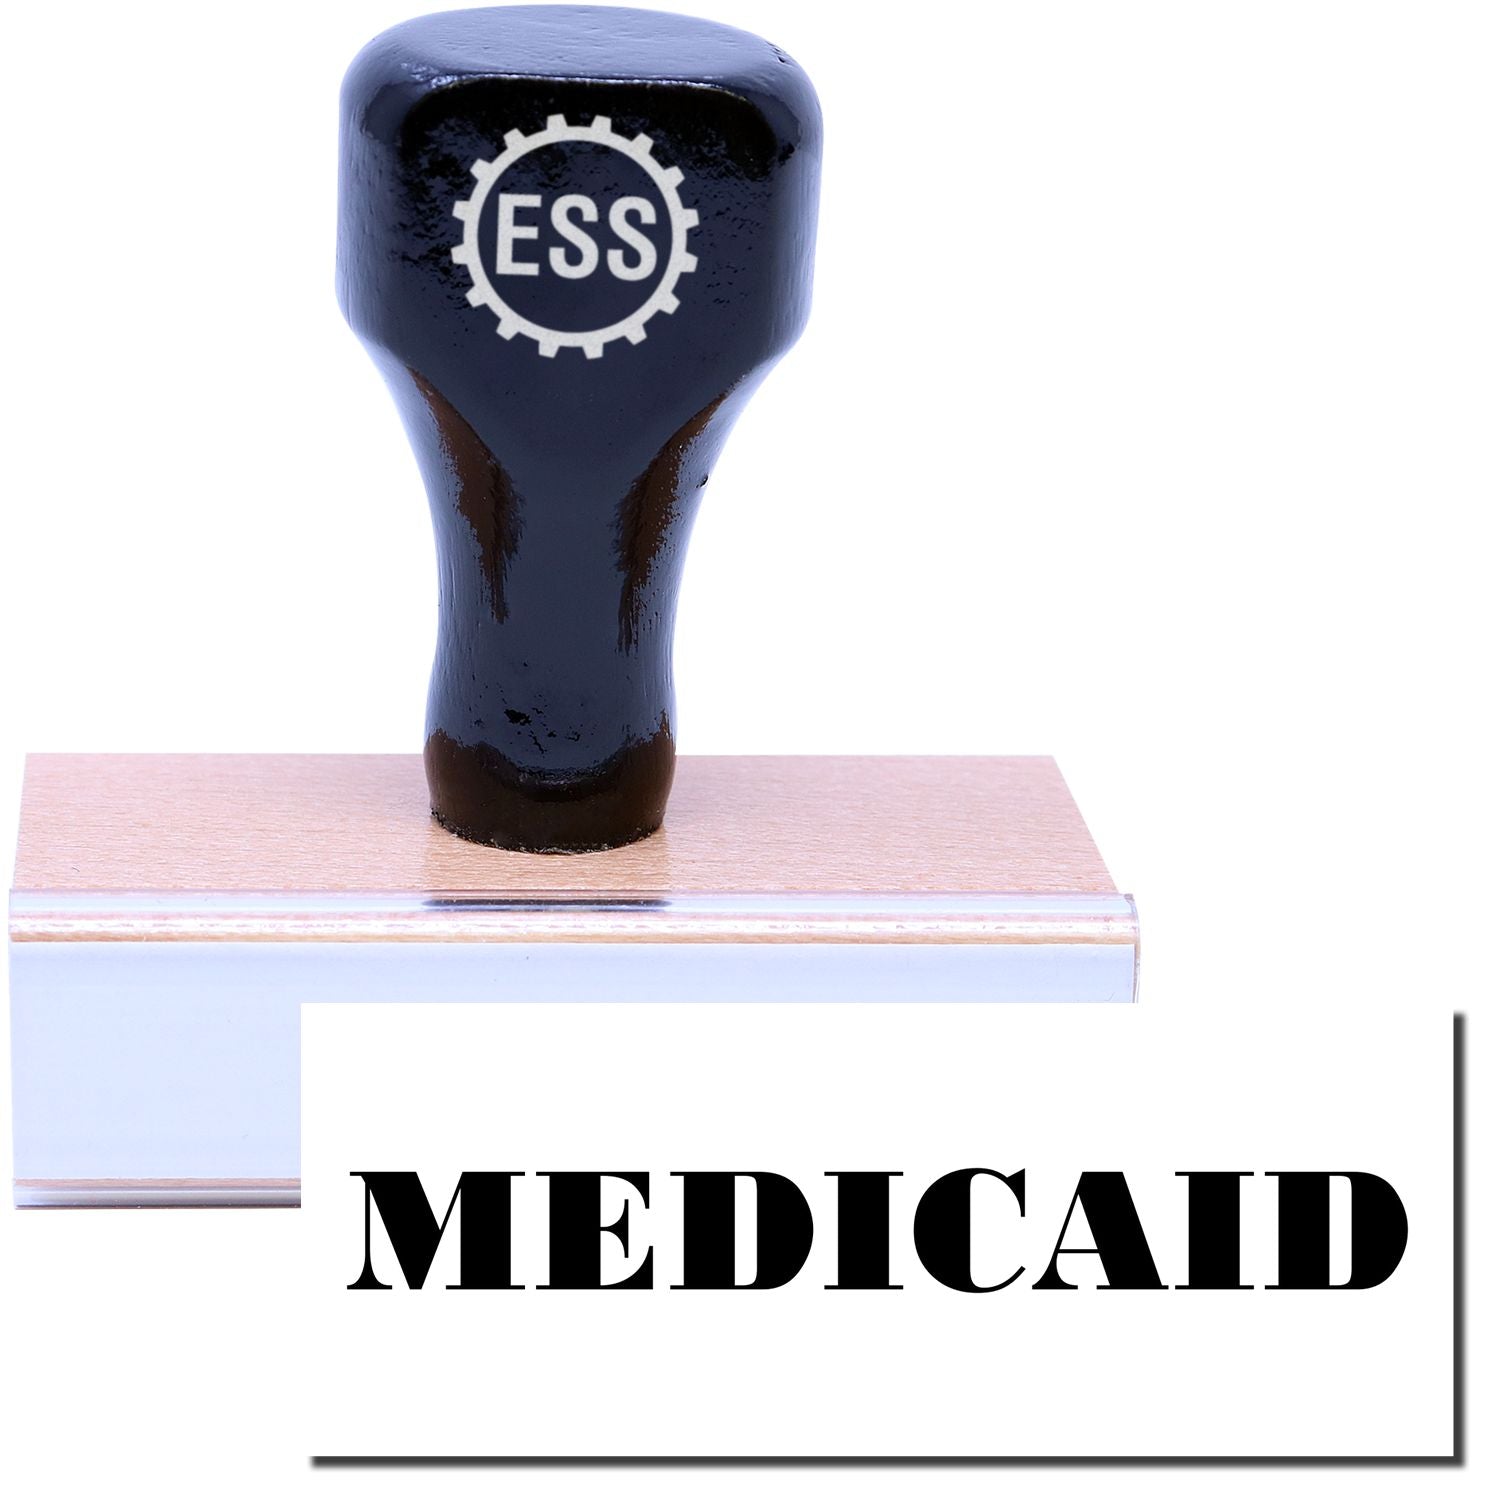 A stock office rubber stamp with a stamped image showing how the text "MEDICAID" is displayed after stamping.